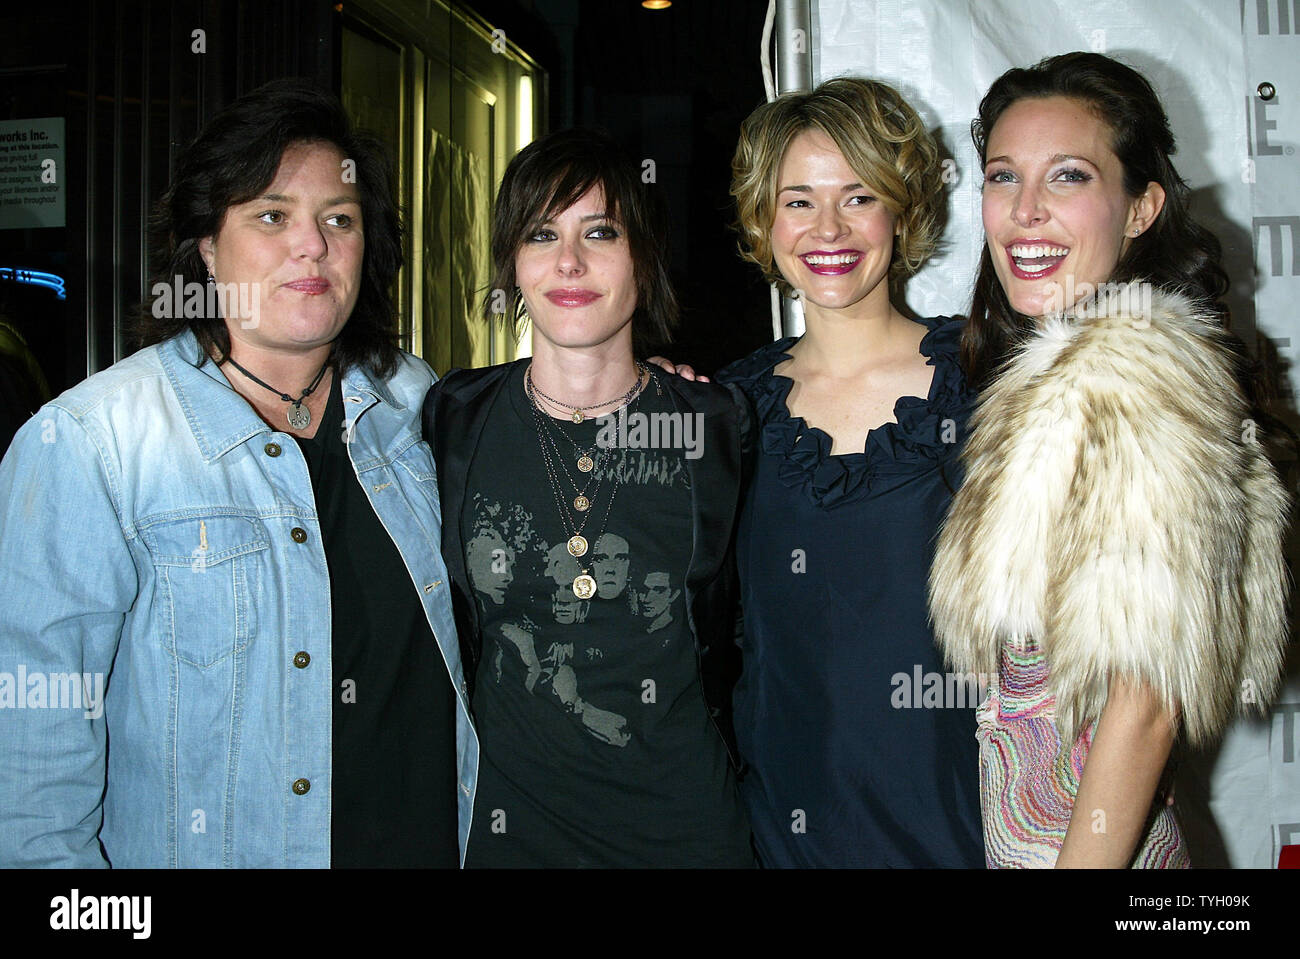 The L Word' cast: Where are they now?